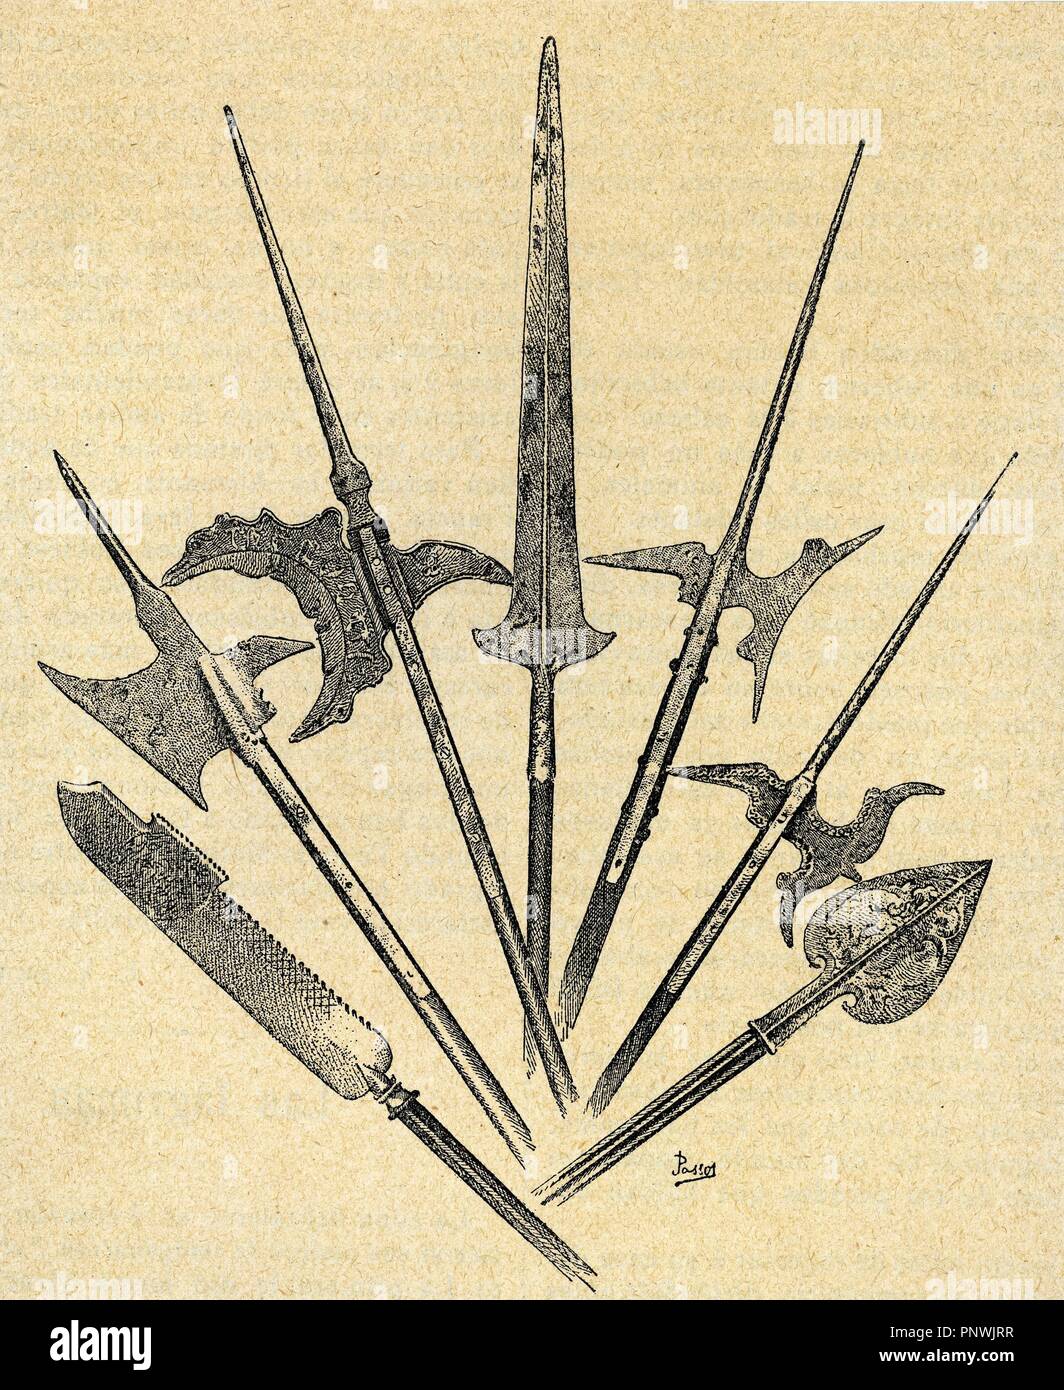 Weapons. Swiss Halberd from 18th century, Swiss halberd from 15th century, German halberd from 16h century, French halberd from 16th century, Venetian halberds from 16th century and spearhead of the 16th century. Engraving. Stock Photo